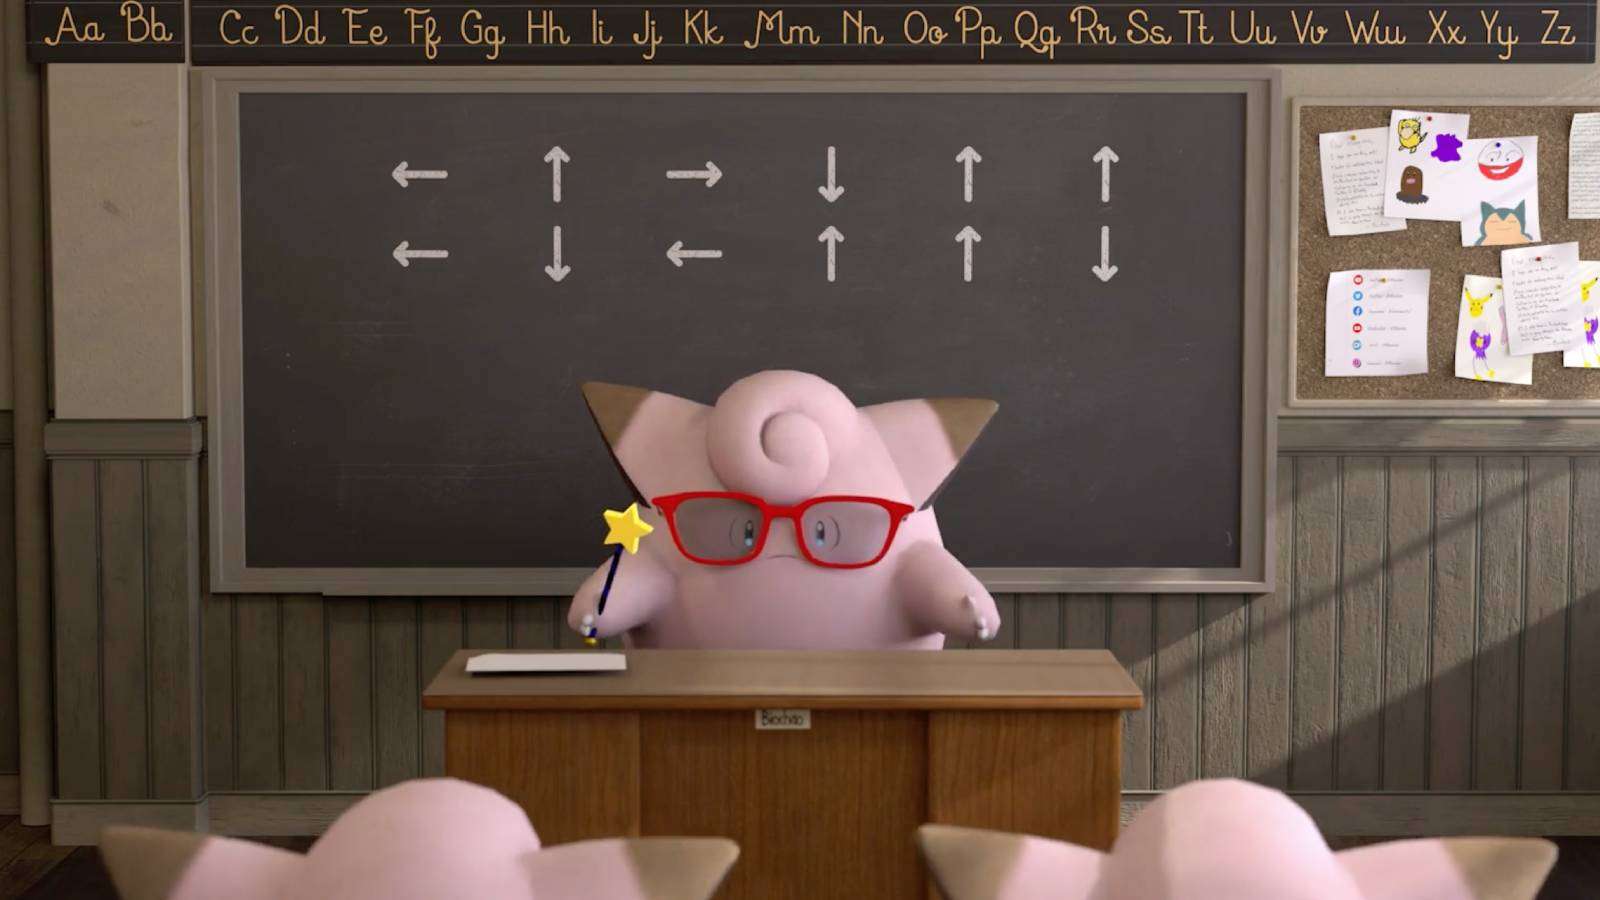 A 3D remake of the original Clefairy Says remake shows a Clefairy leading a classroom